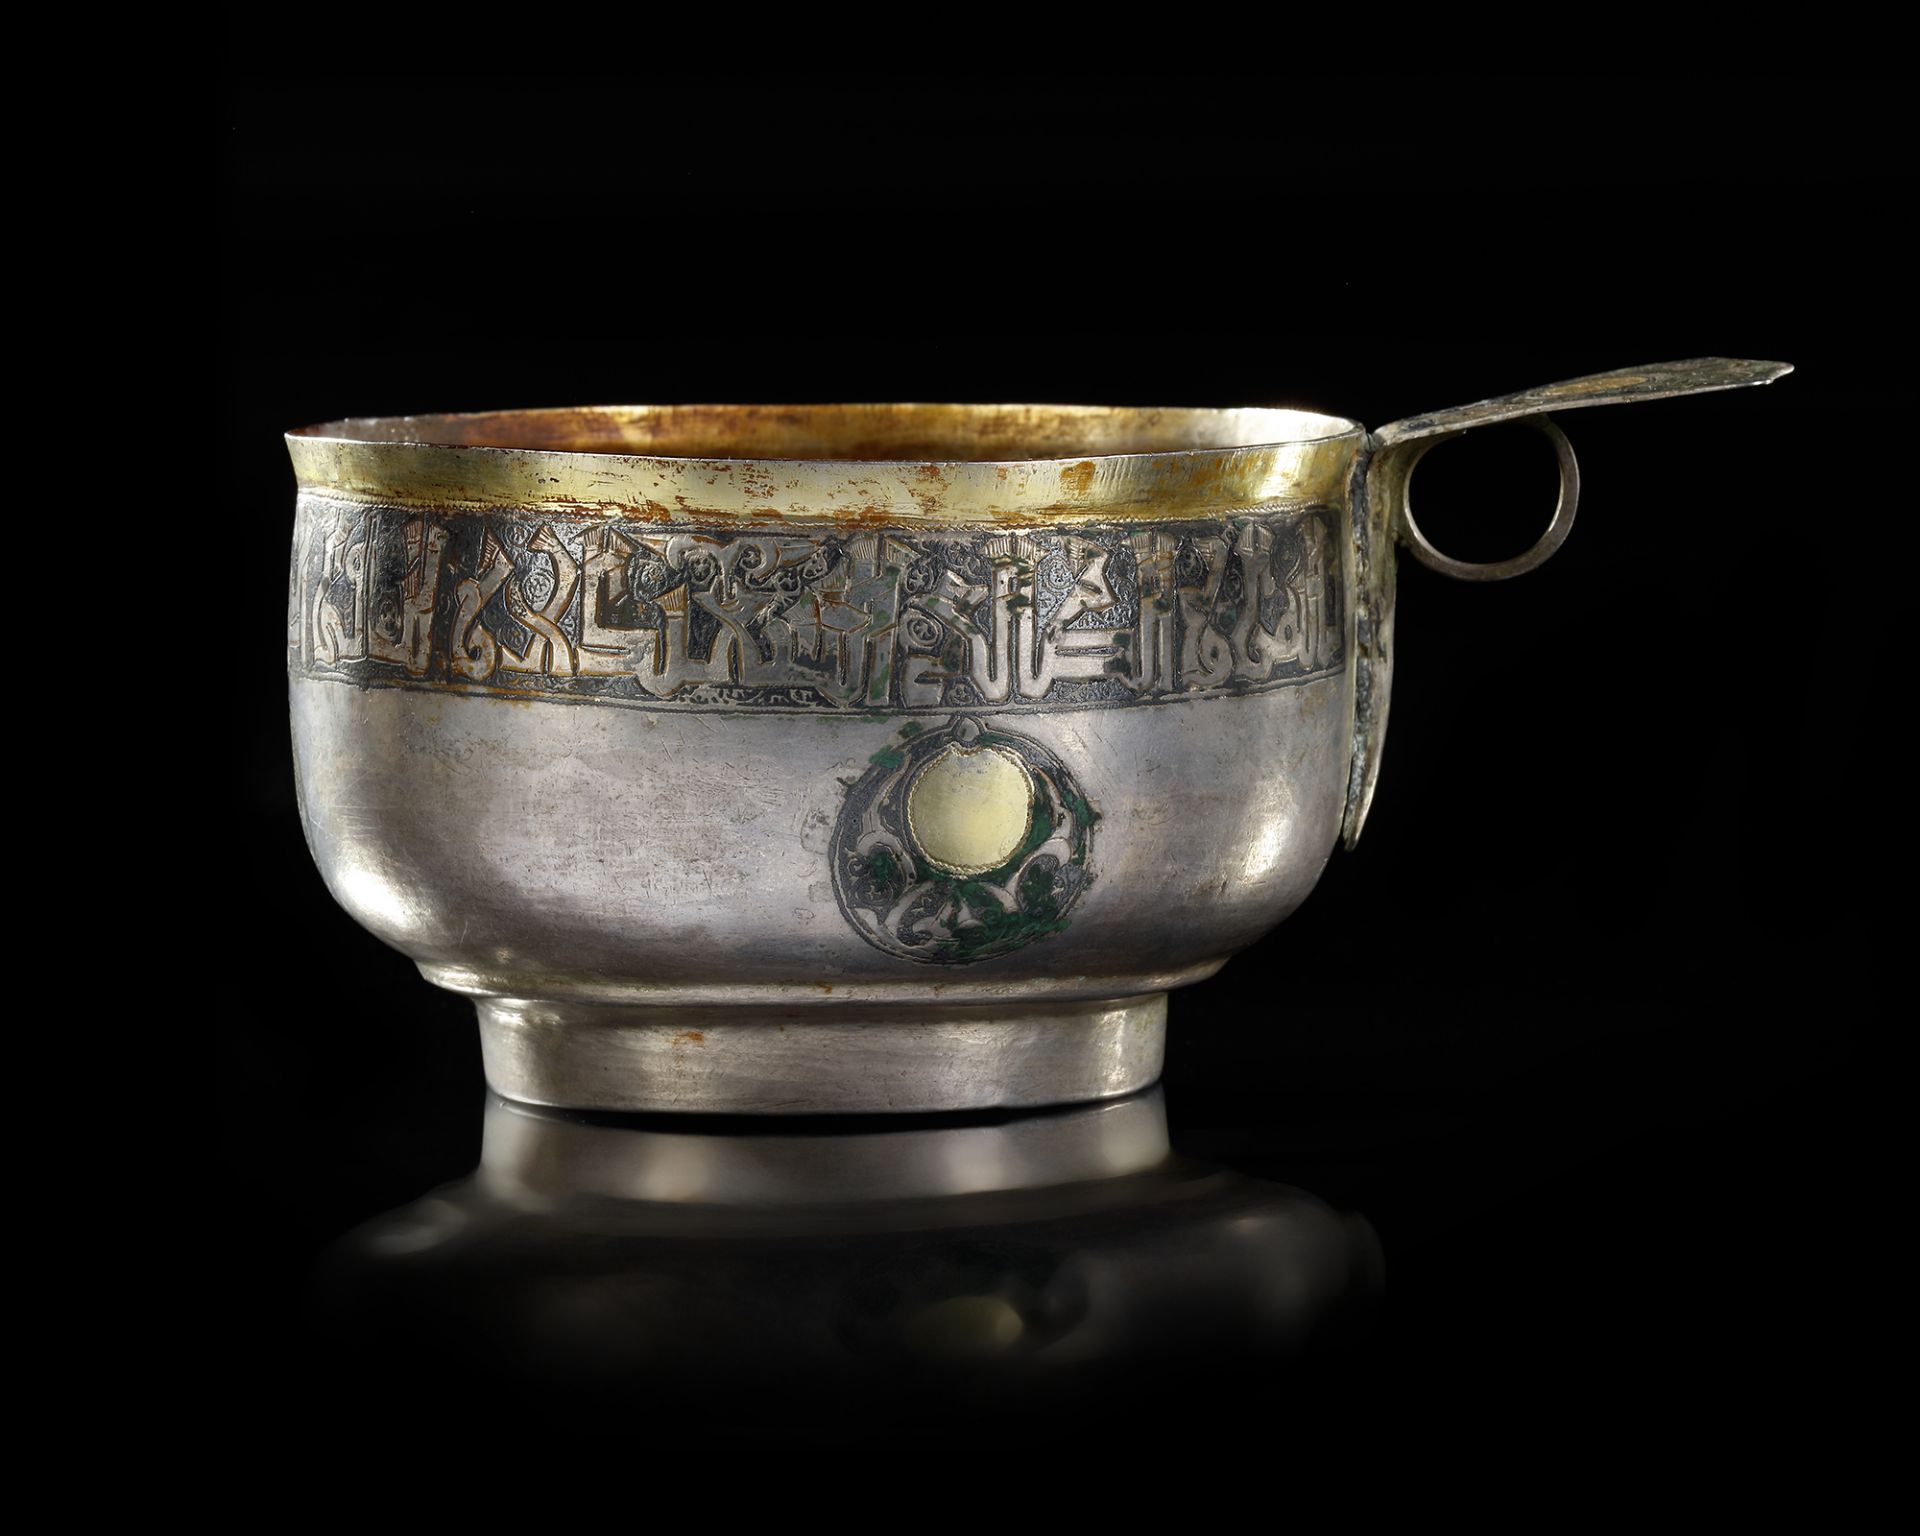 A RARE SILVER AND NIELLOED CUP WITH KUFIC INSCRIPTION, PERSIA OR CENTRAL ASIA, 11TH-12TH CENTURY - Image 5 of 34